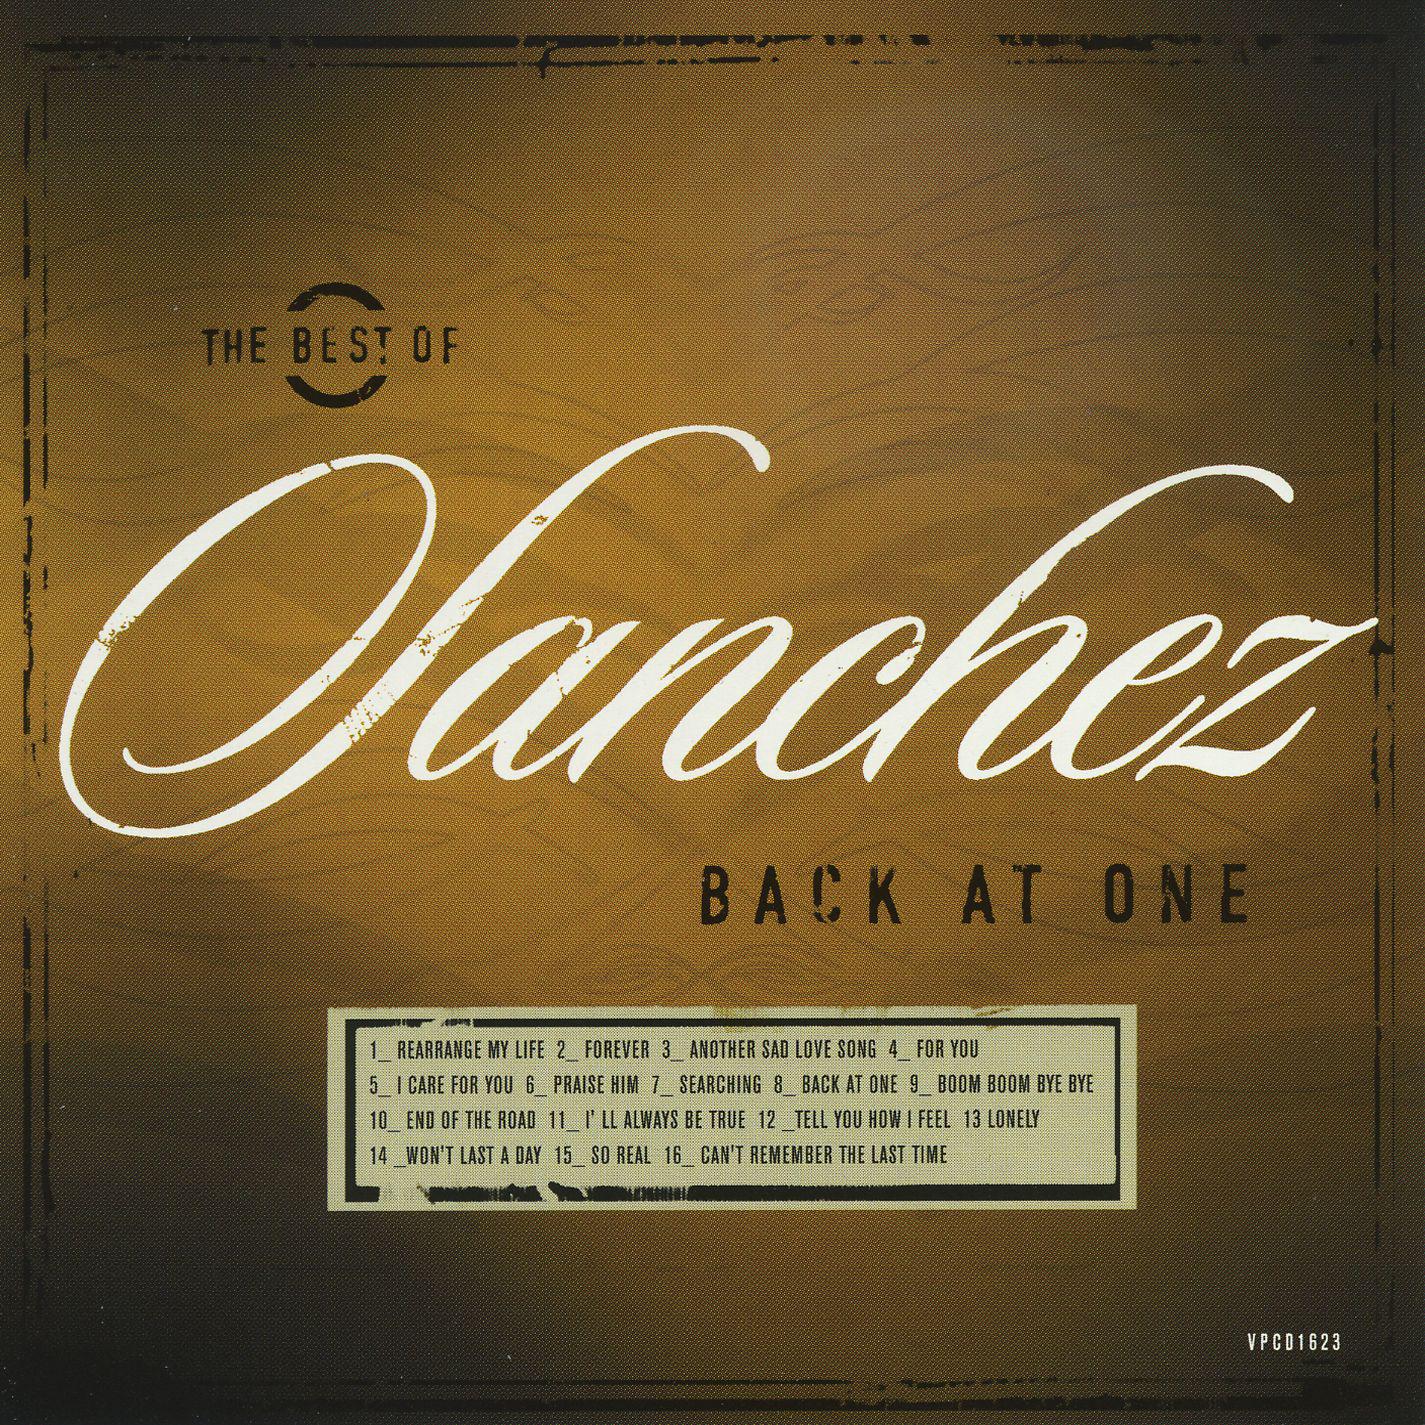 Back At One/The Best Of Sanchez